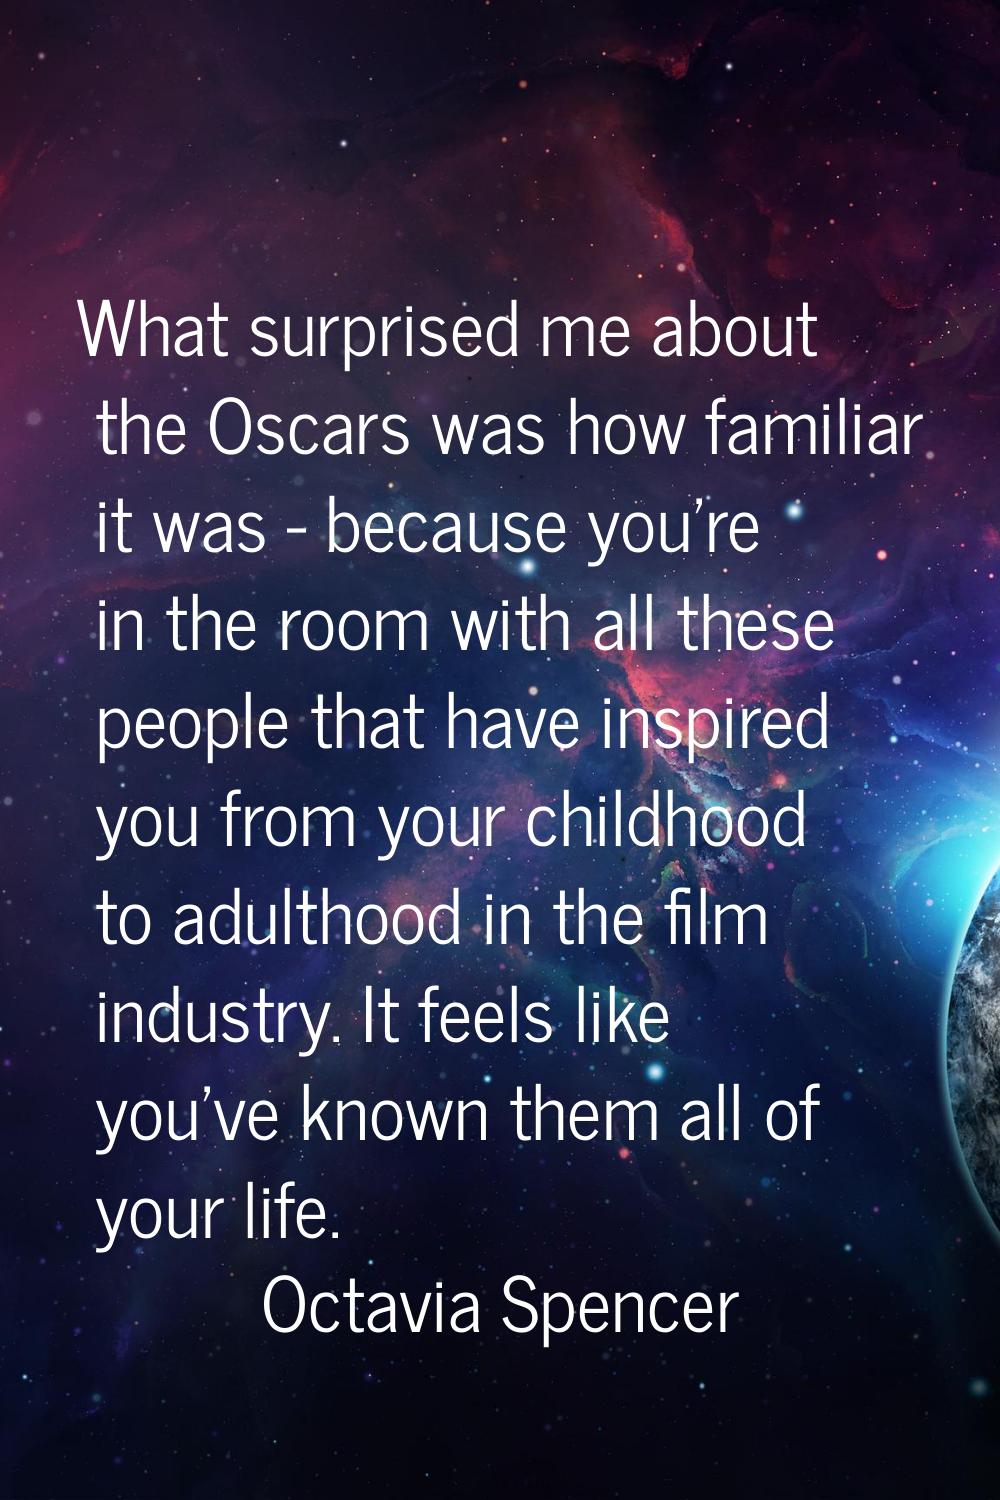 What surprised me about the Oscars was how familiar it was - because you're in the room with all th